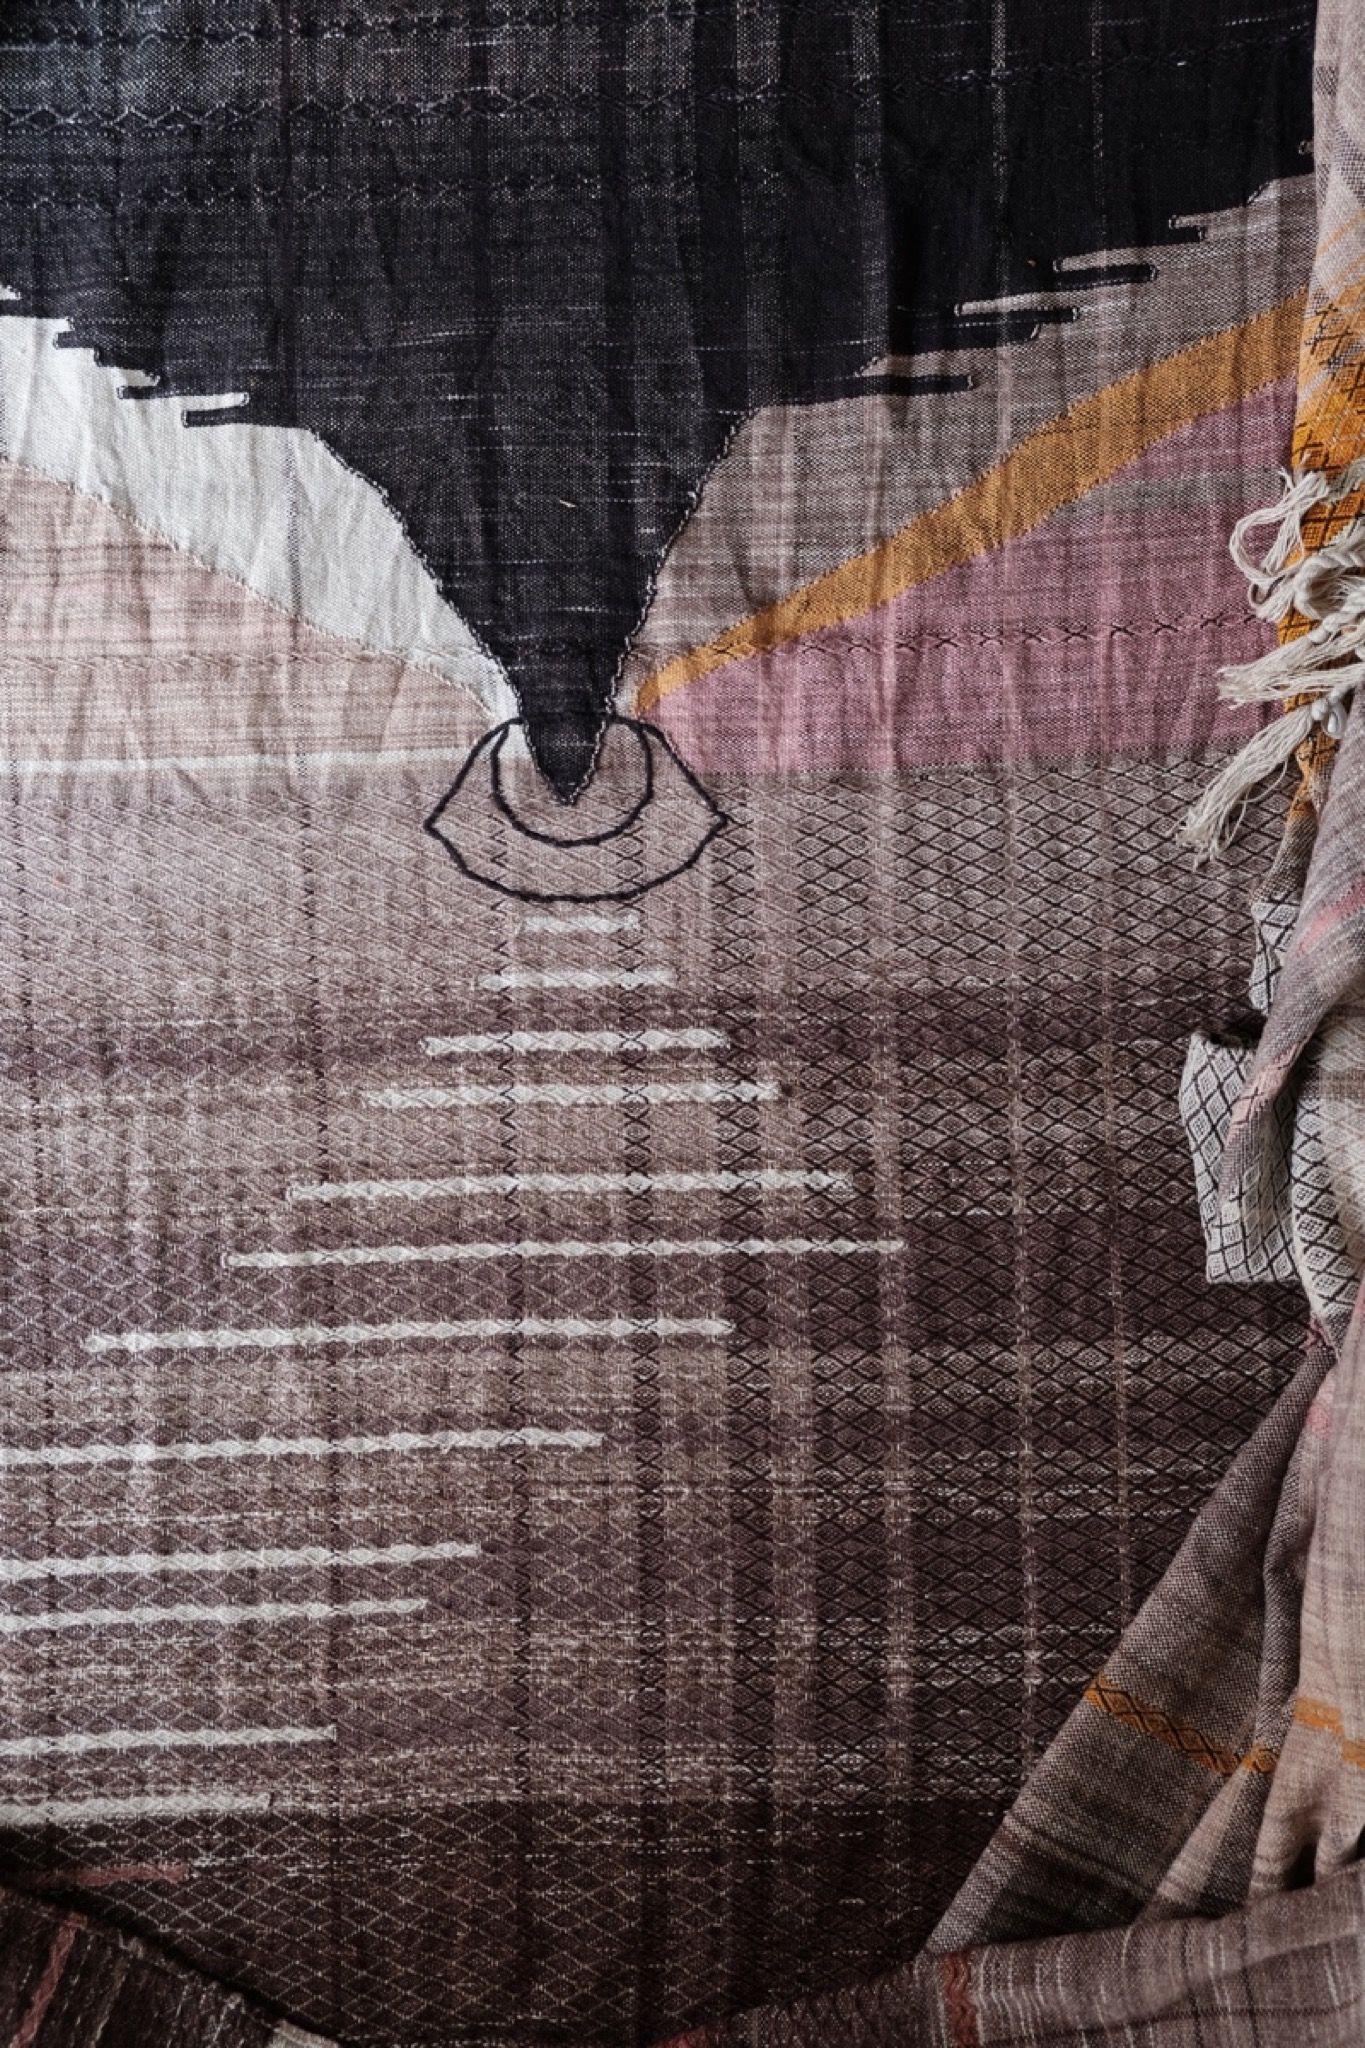 Detail of handwoven highly textured diamond pattern raw silk fabric with an eye radiating geometric shapes